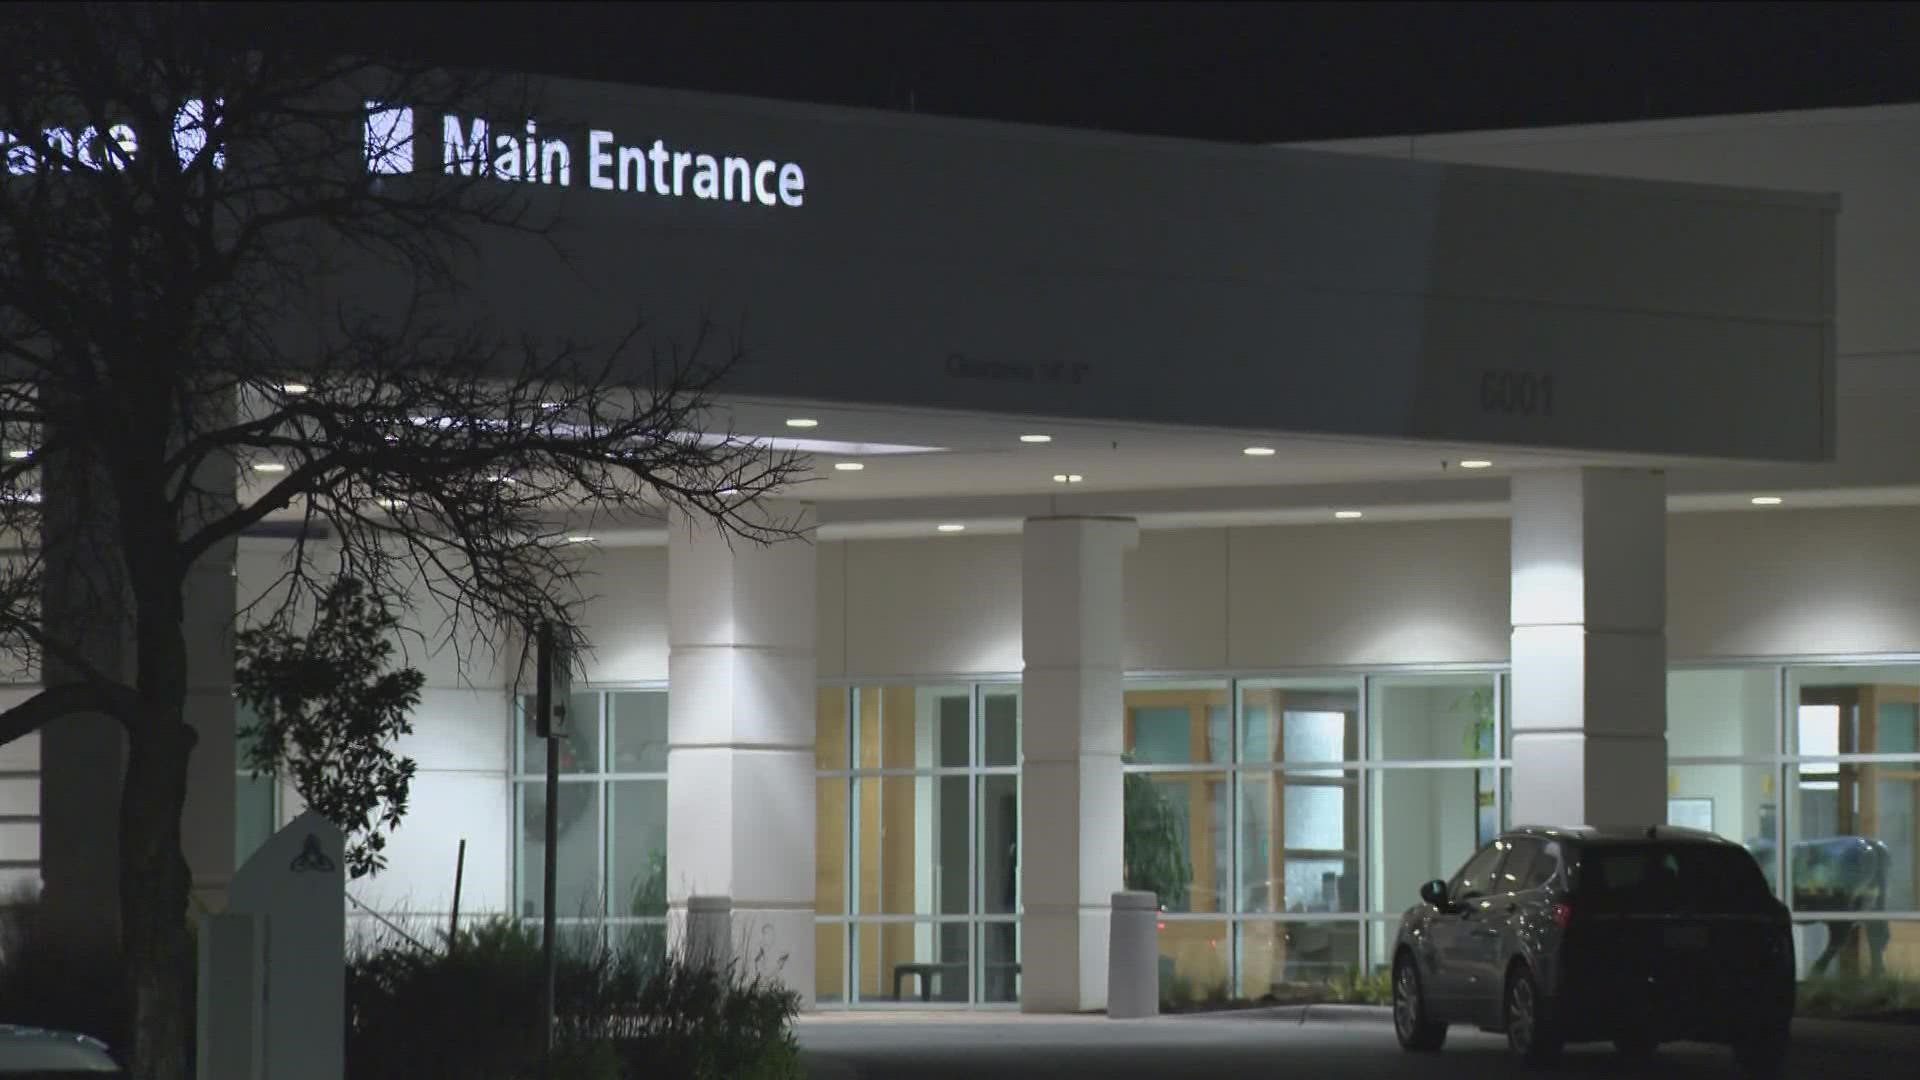 A deputy shot and killed a suspect at Seton Hospital in Kyle.